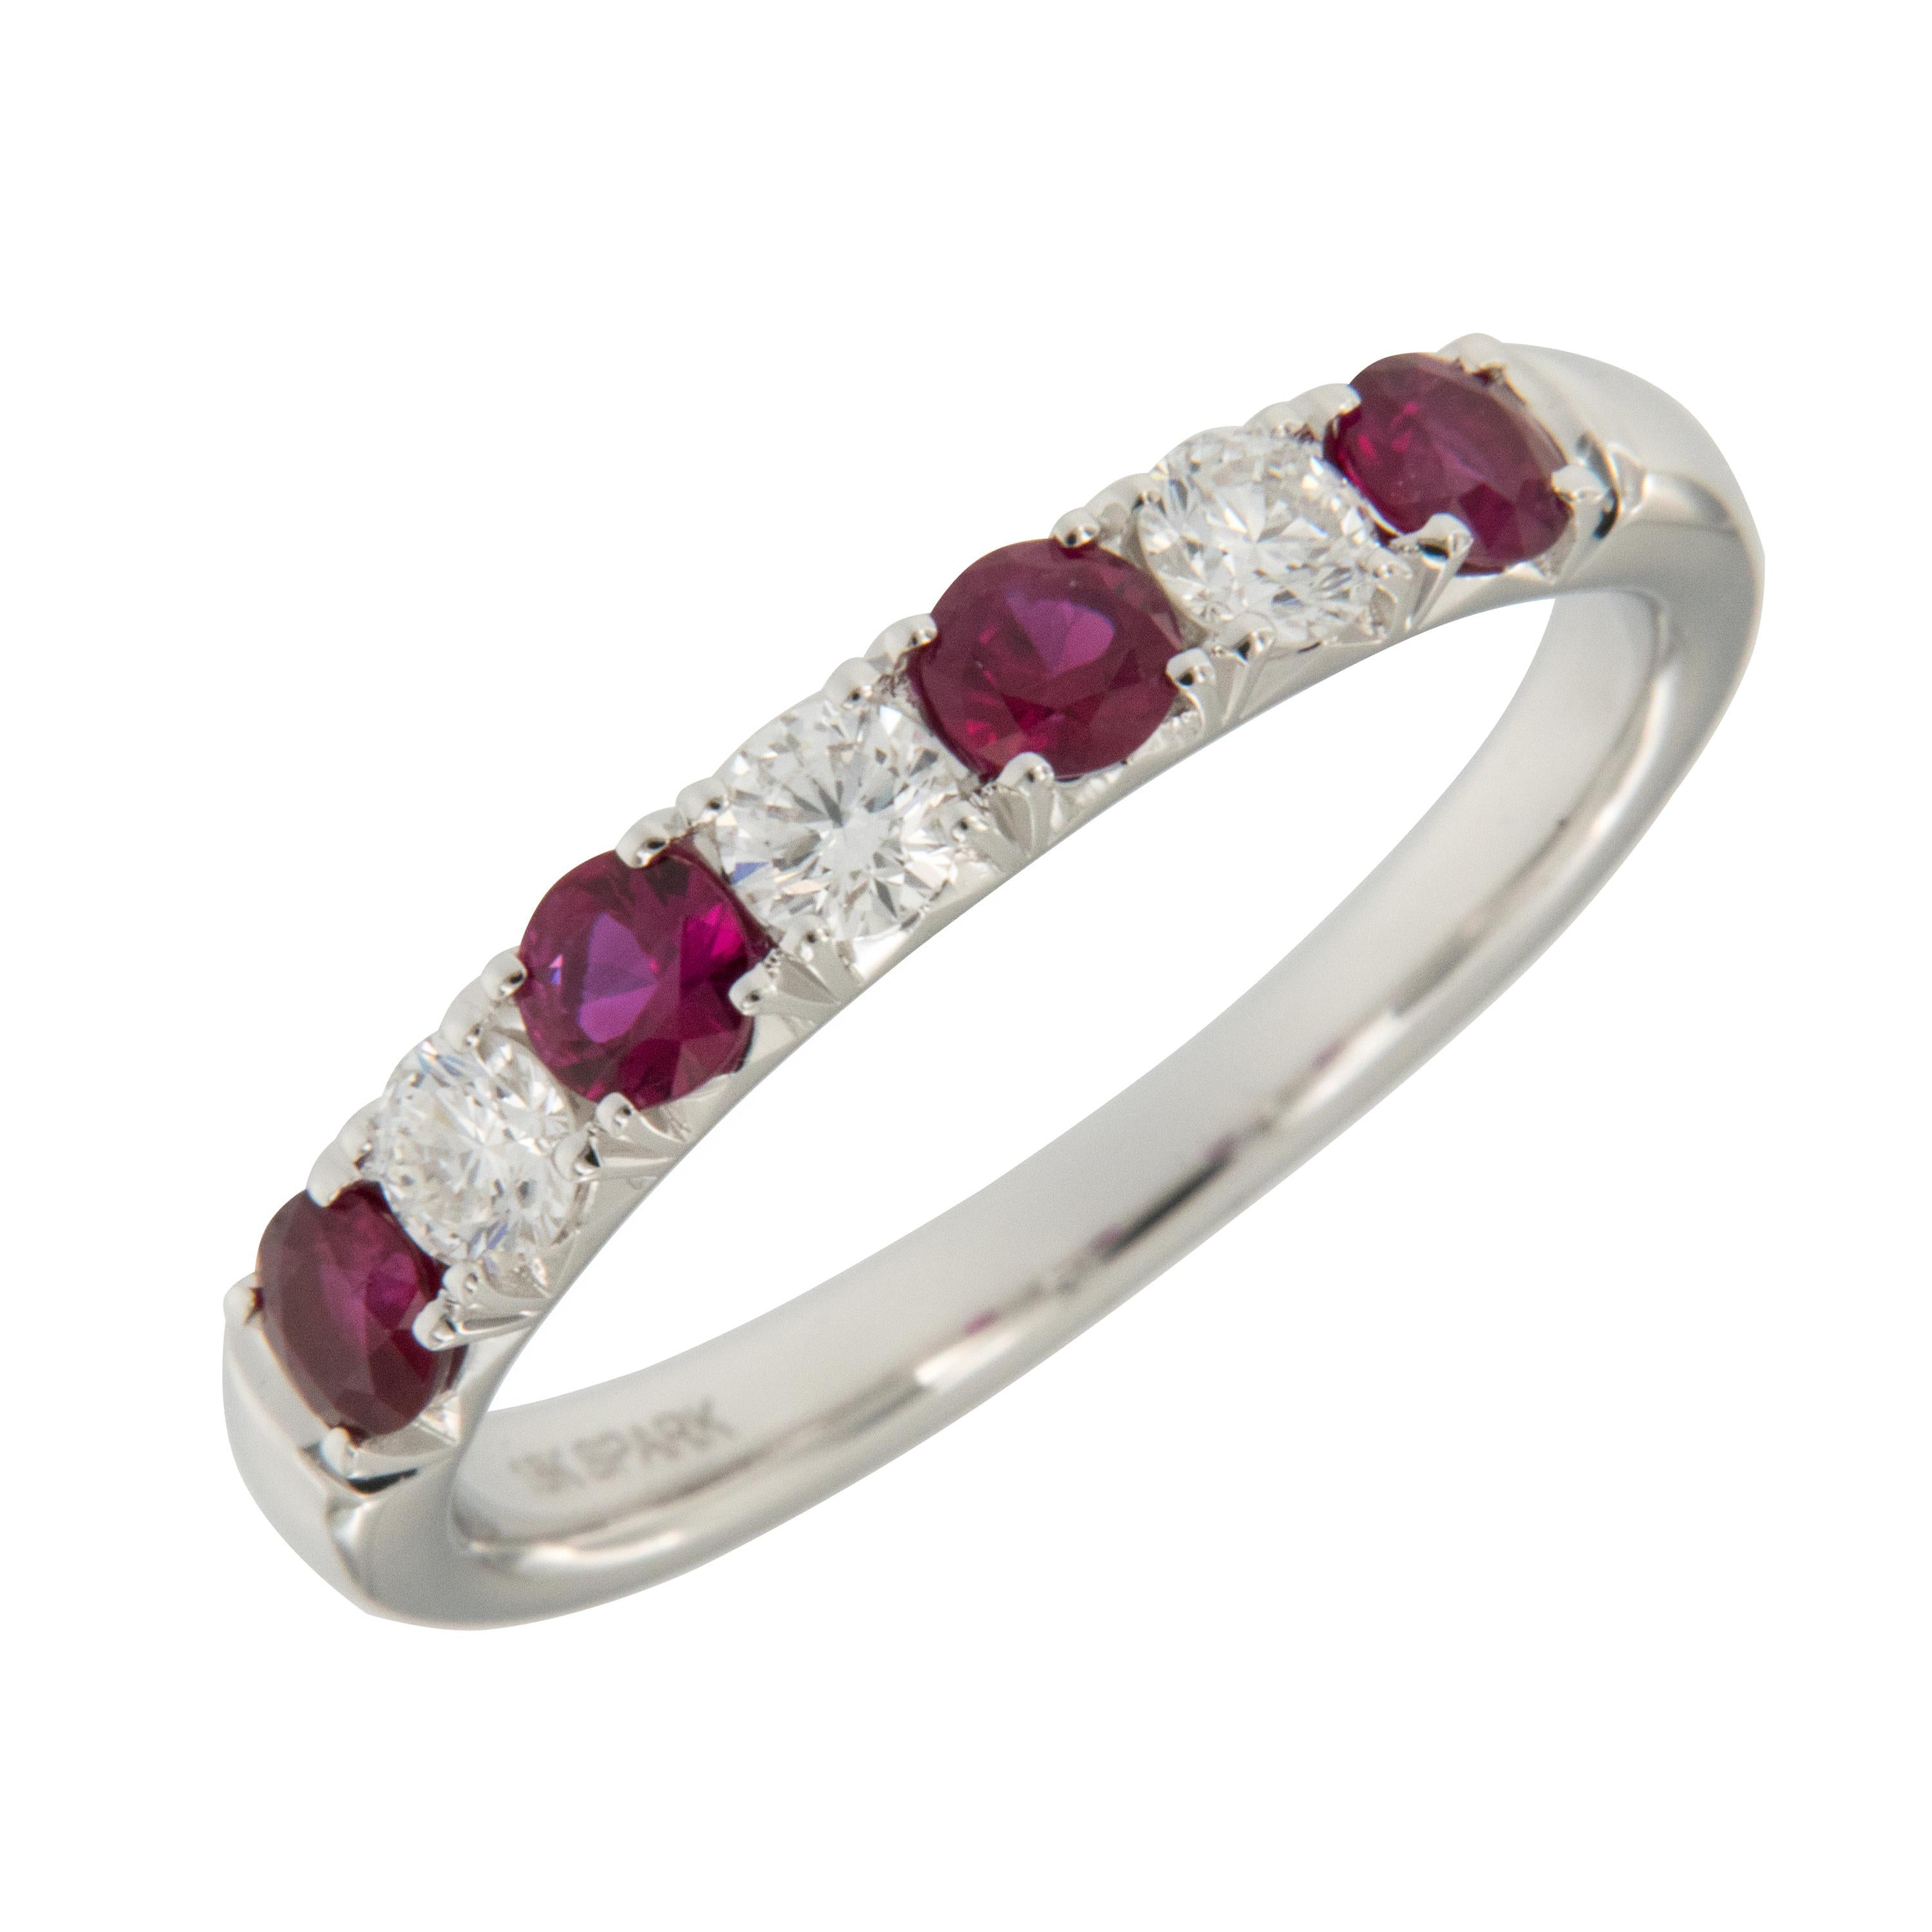 Spark is well known for making some of the most beautiful colored gemstone jewelry for the last 49 years. Crafted in fine 18 karat white gold with the most vibrant, red rubies & beautiful white diamonds, this ring looks fantastic alone or stacked